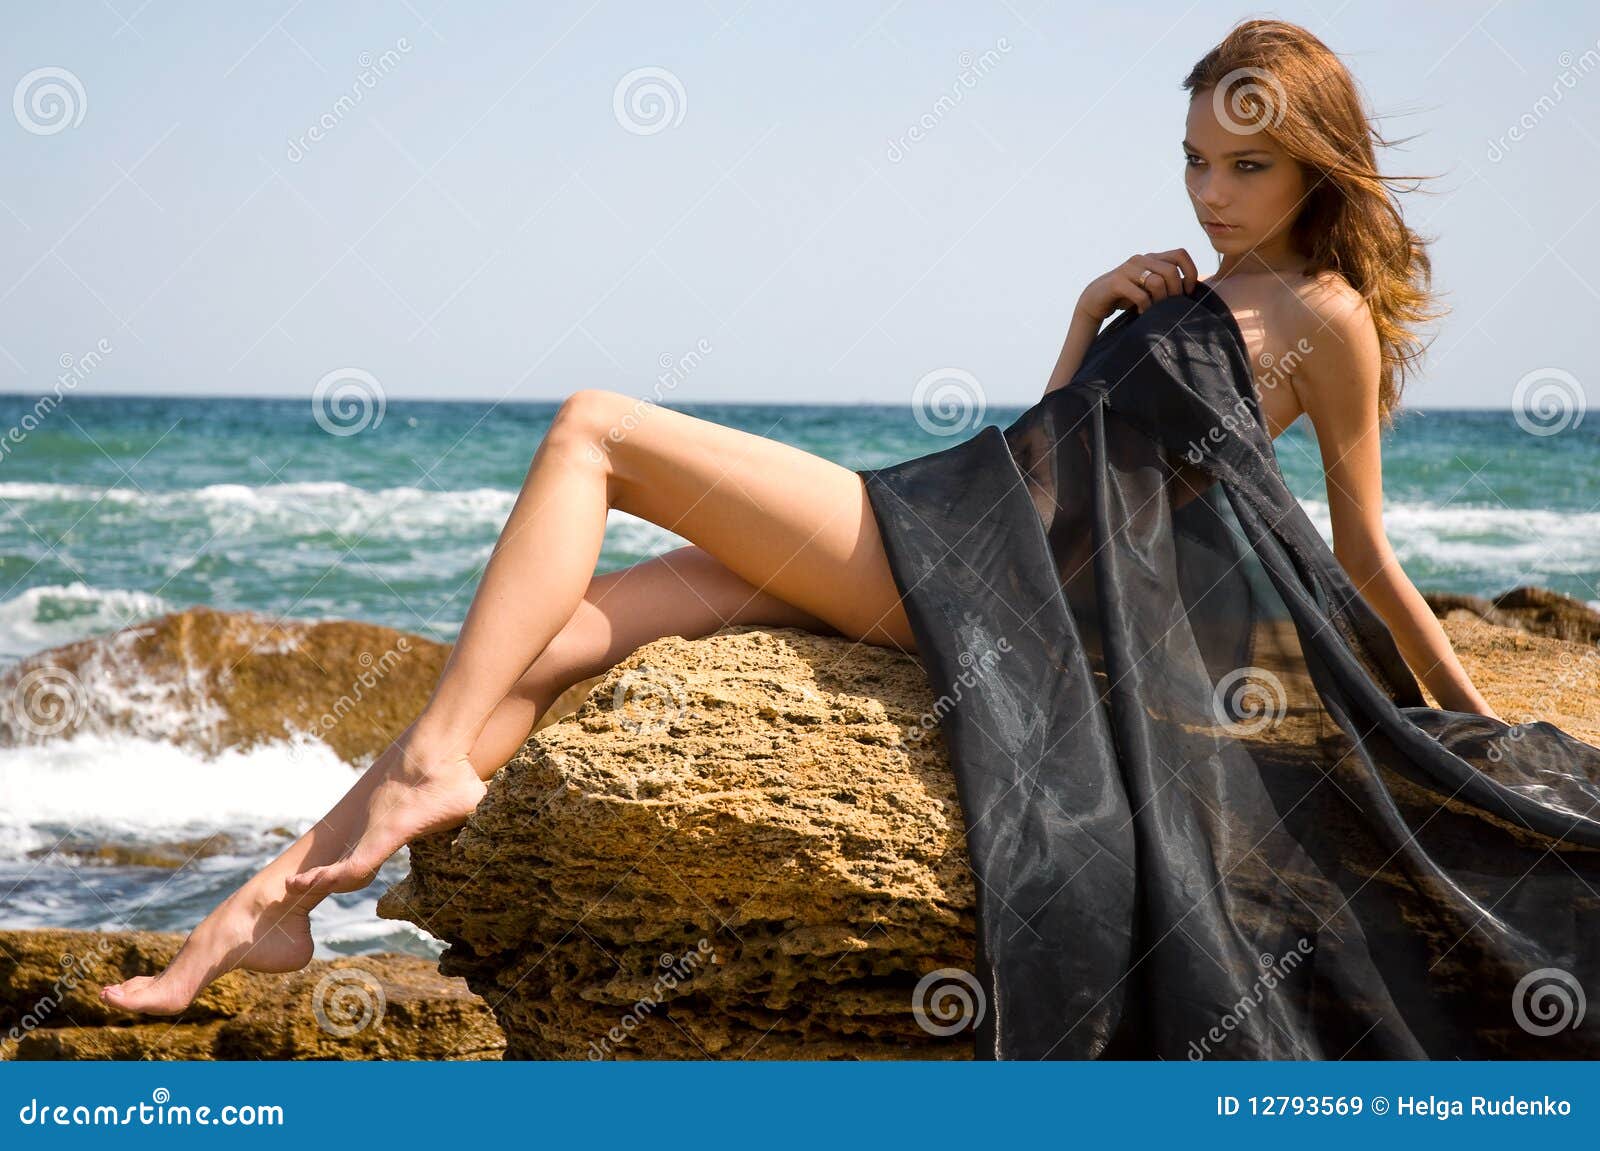 Long Beach Photo Gallery Naked - Nude Young Girl In The Beach Stock Image - Image of long ...